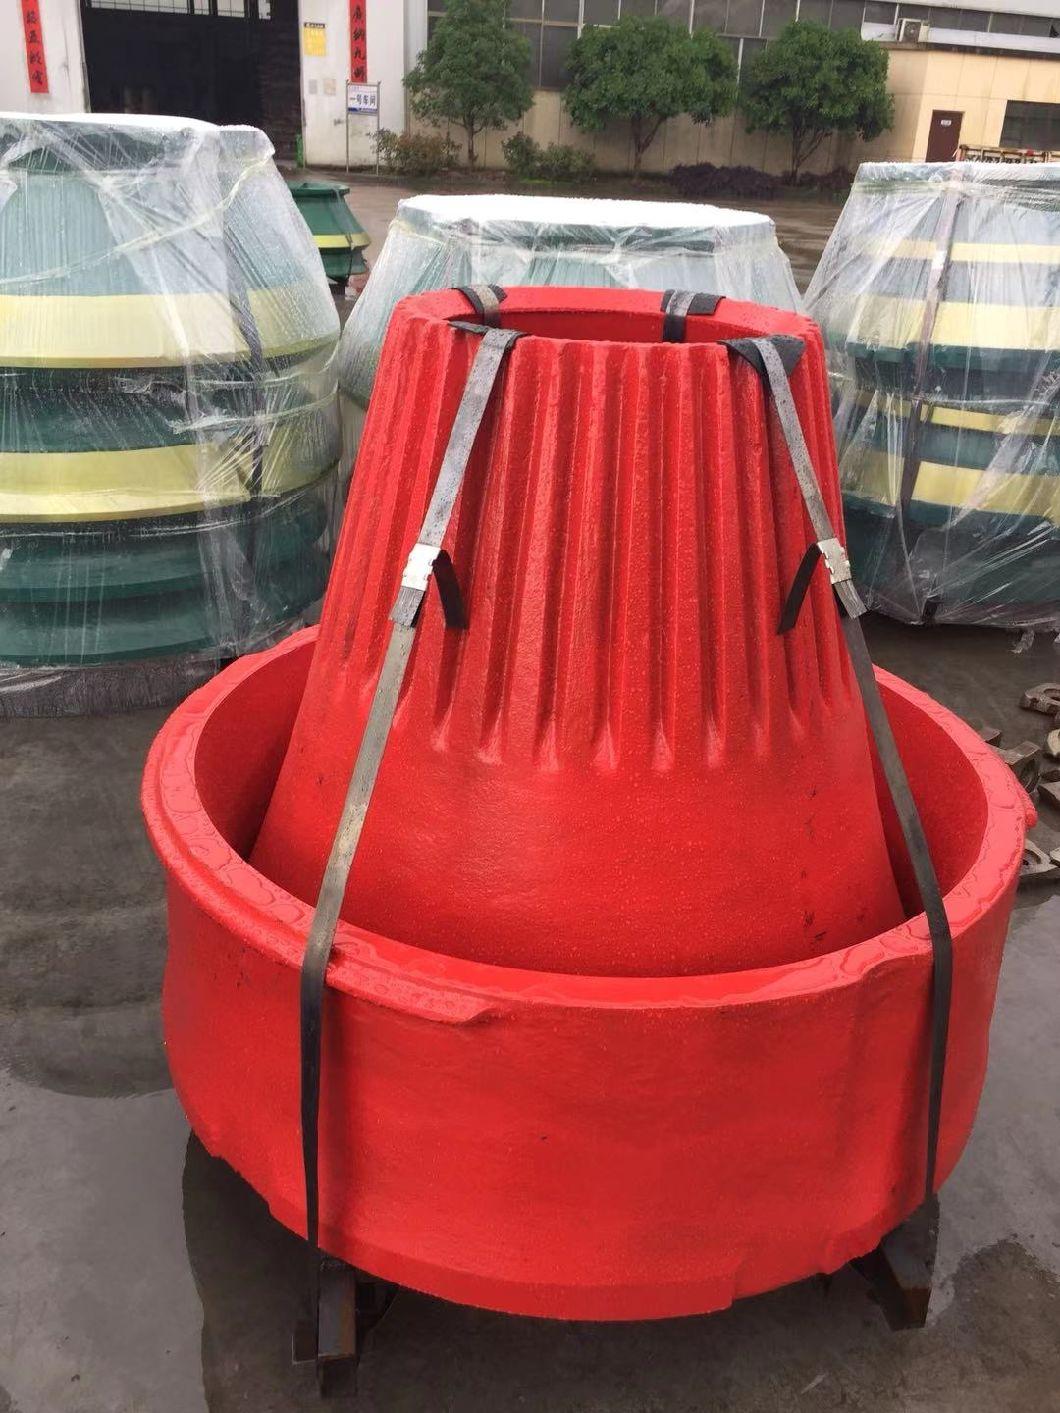 High Quality Bowl Liner Feed Plate Mantle for Cone Crusher for Sale